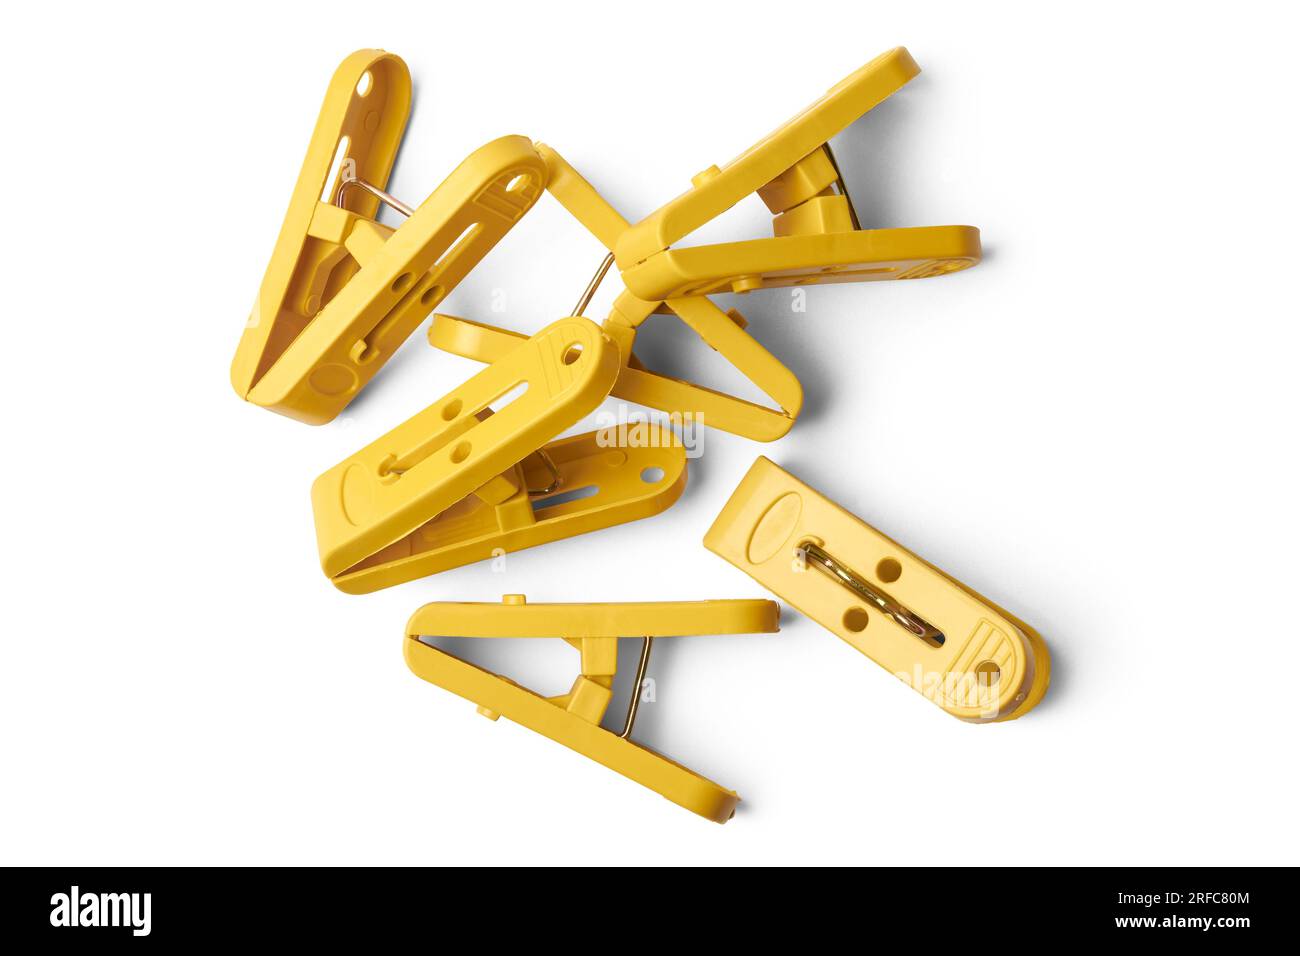 pile of yellow clips, plastic paper or laundry clips, clothespin or clothes pegs isolated on white background taken straight from above Stock Photo